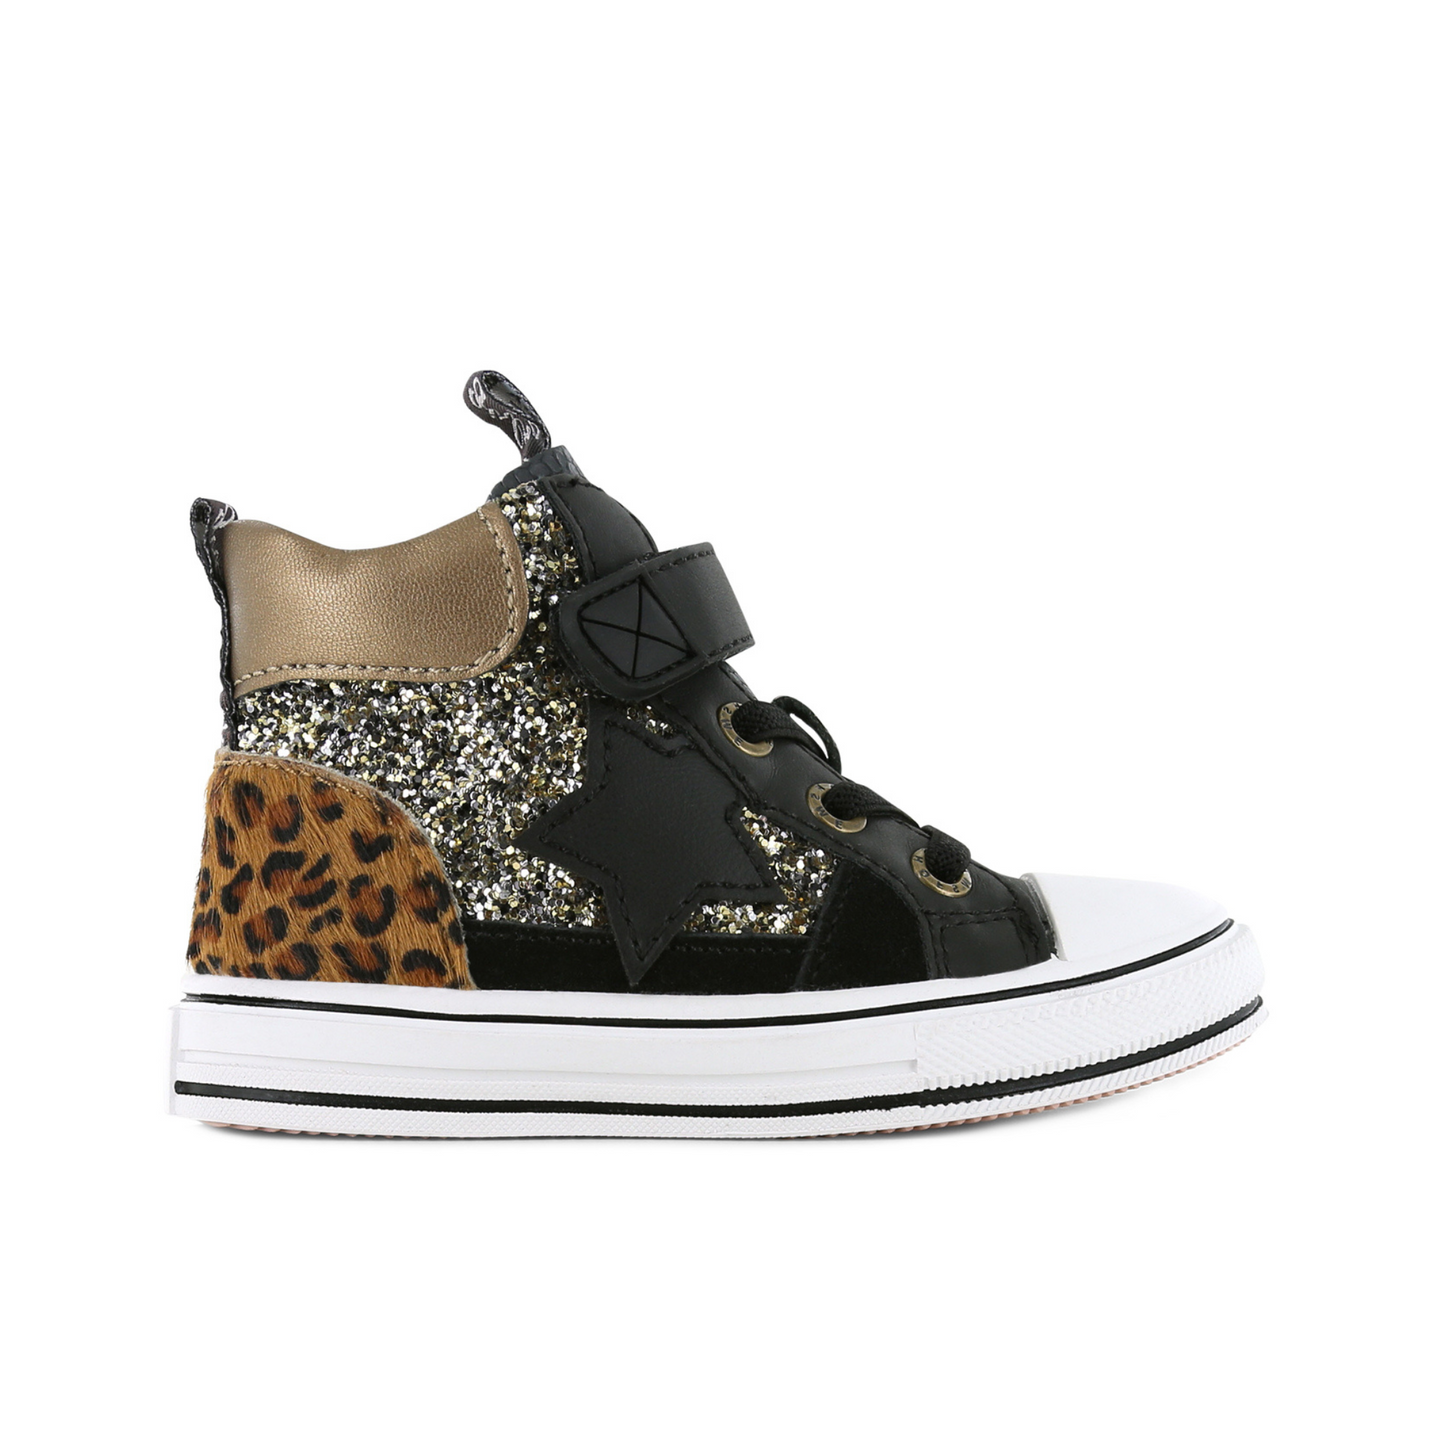 Omero Black And Gold Riptape Sneaker Style Ankle Boot